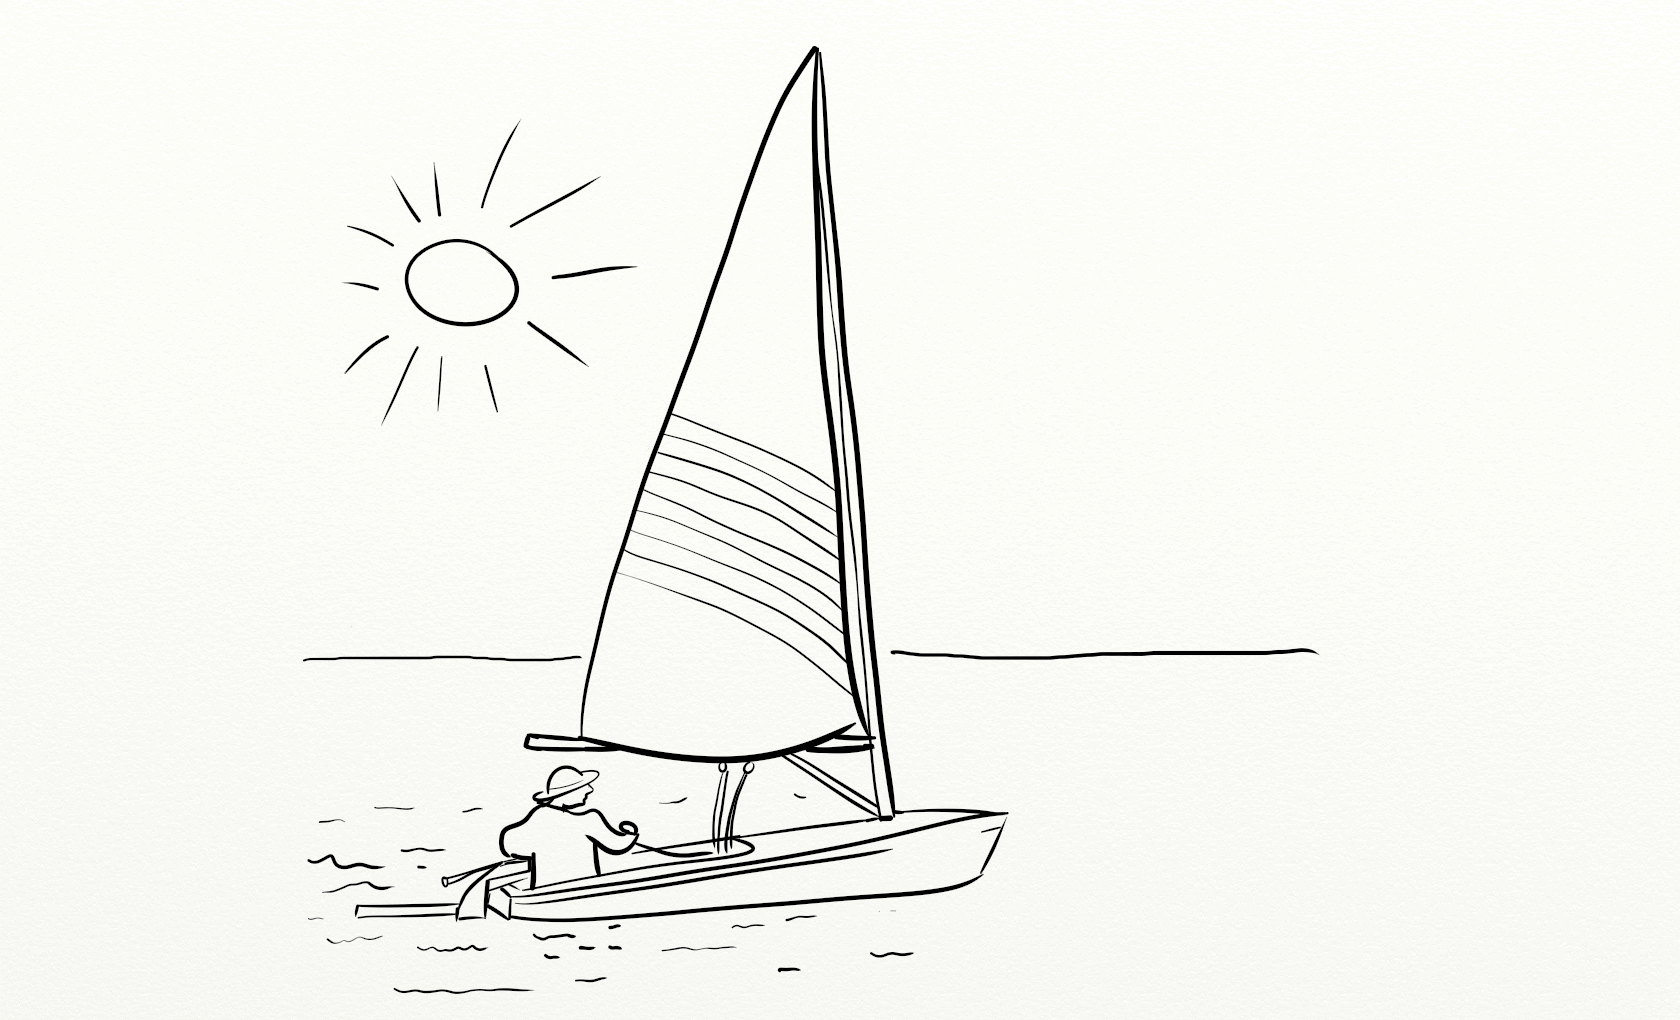 Free Boat Outline, Download Free Clip Art, Free Clip Art on